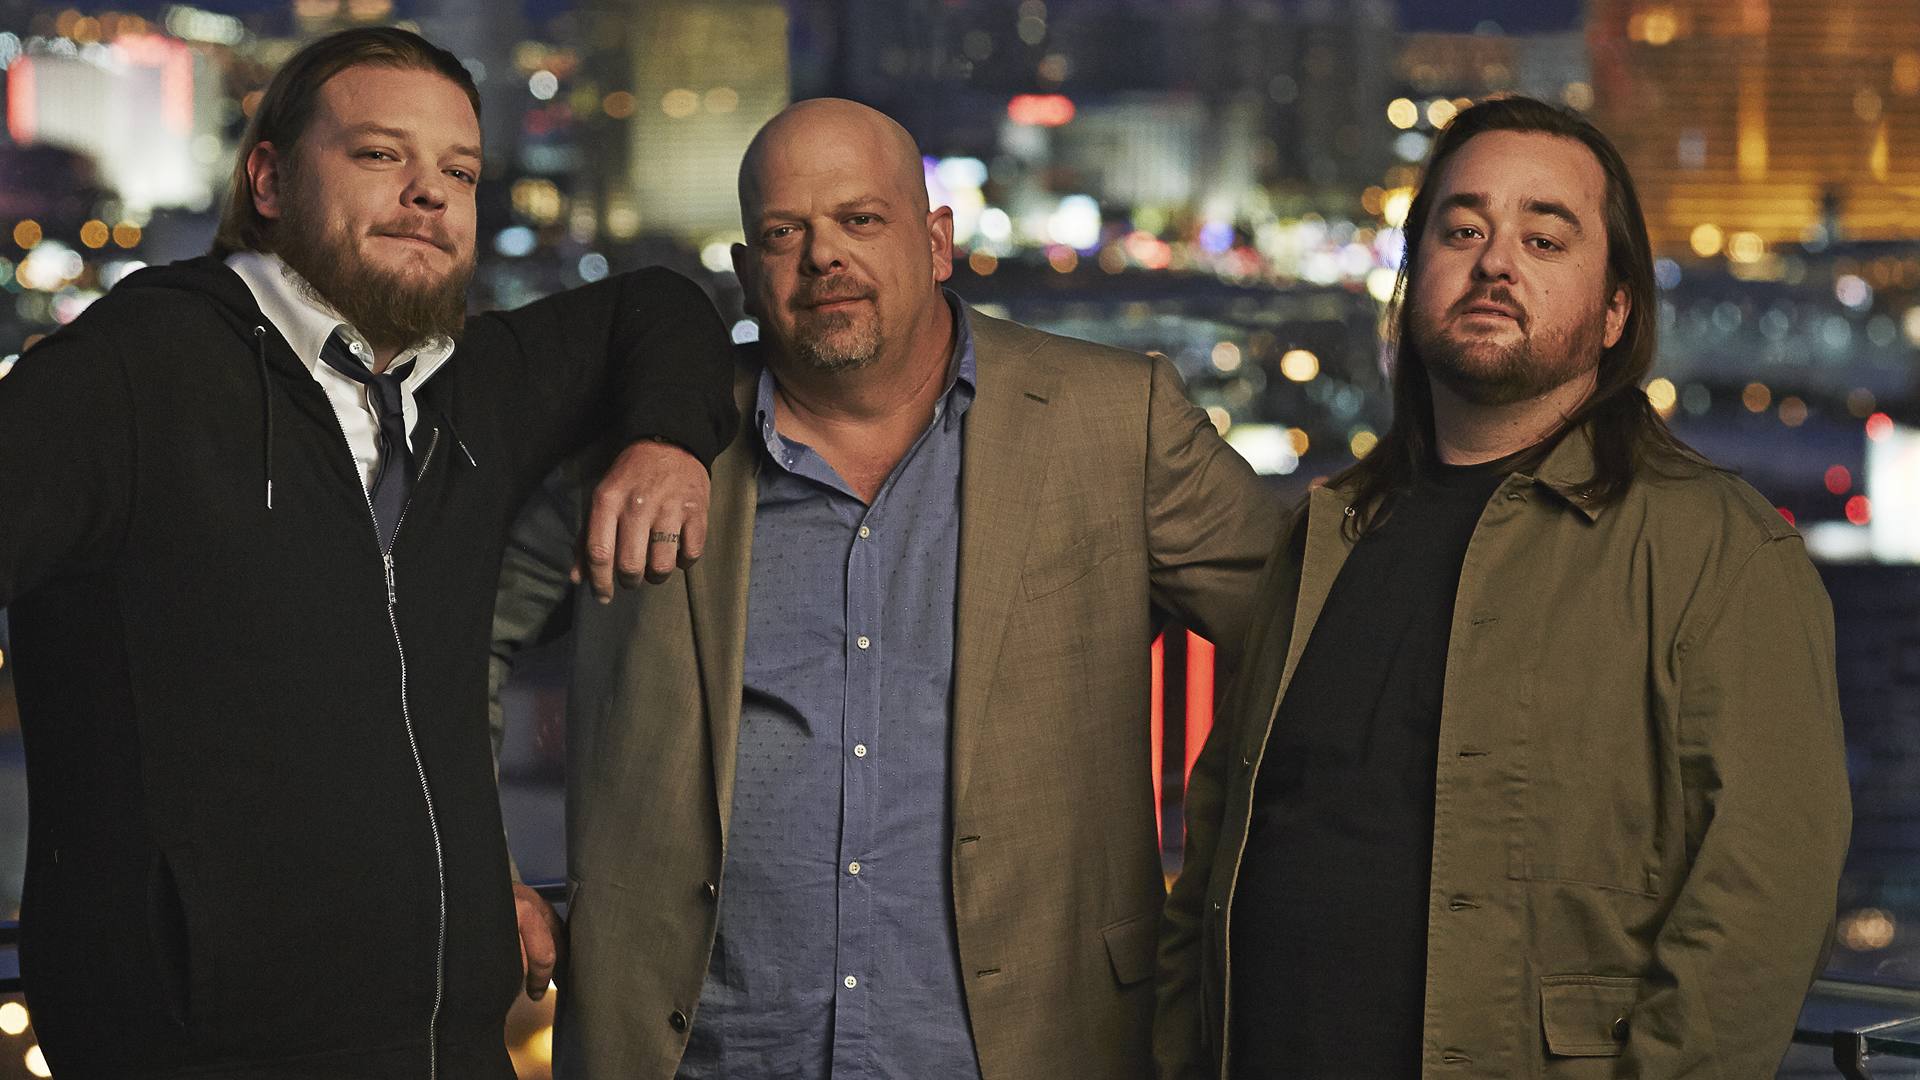 Pawn Stars Shoot During the World Series of Poker